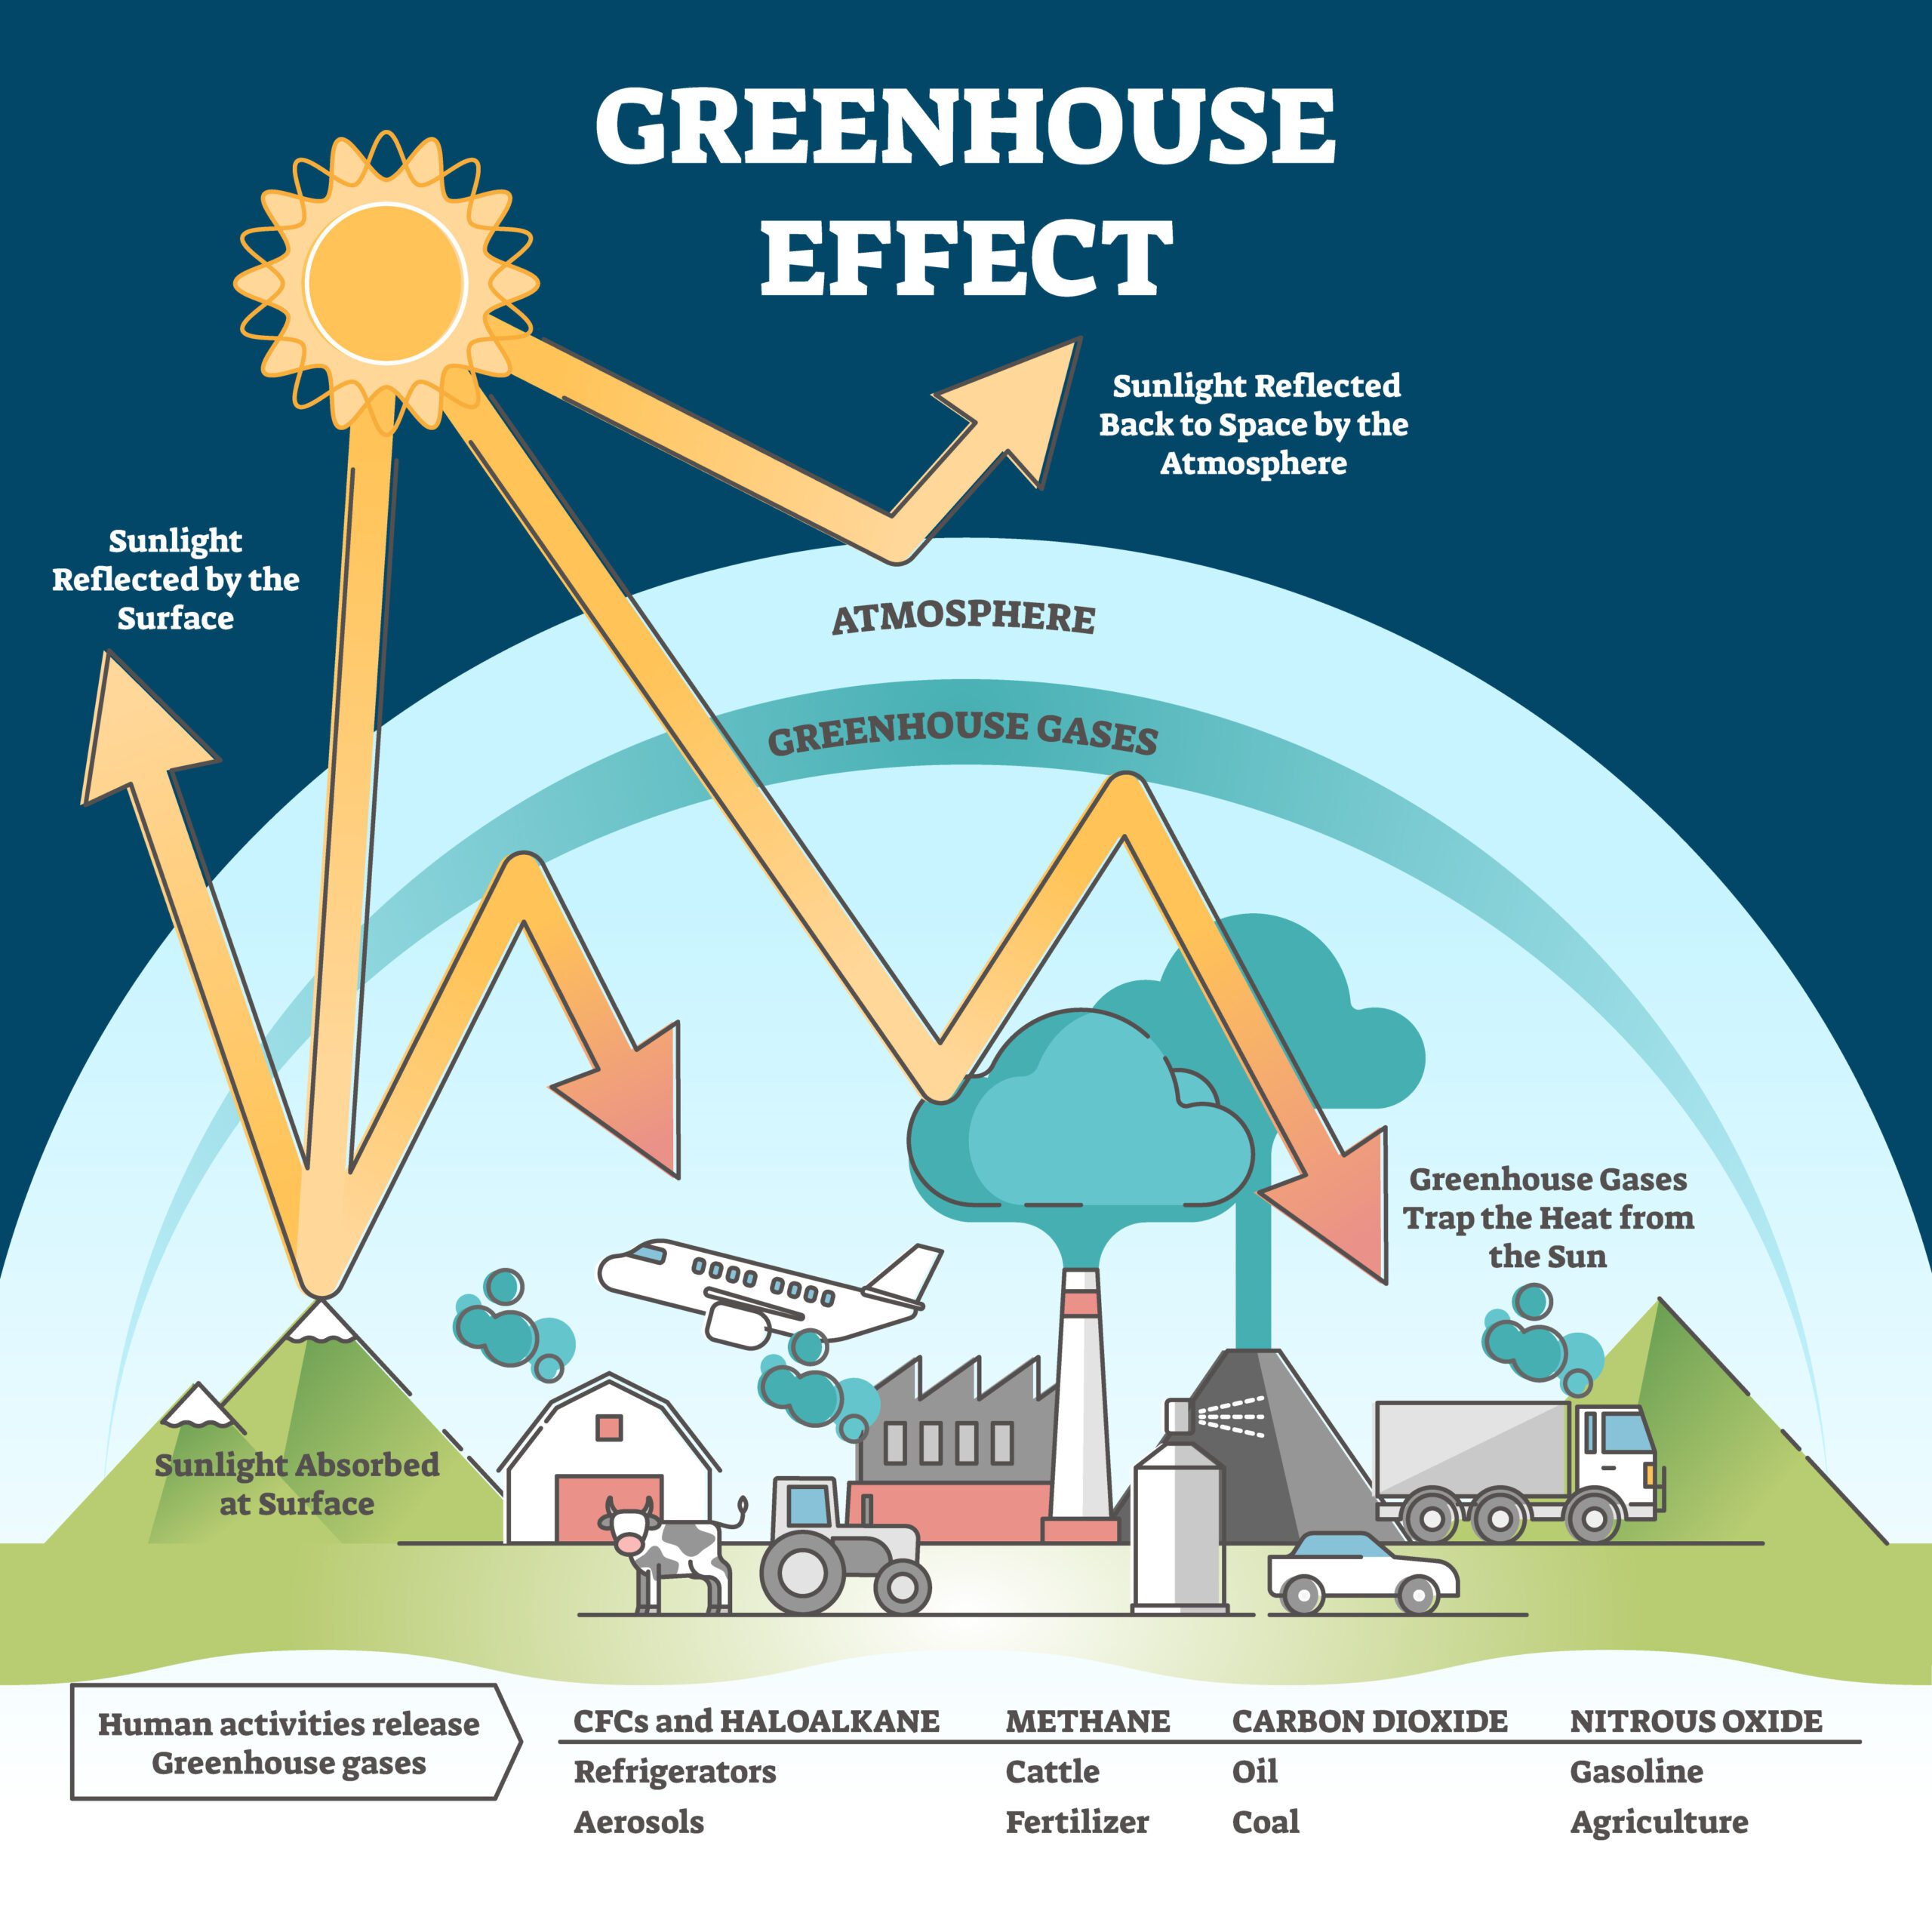 An infographic depicting how greenhouse gases affect the climate and cause global warming.